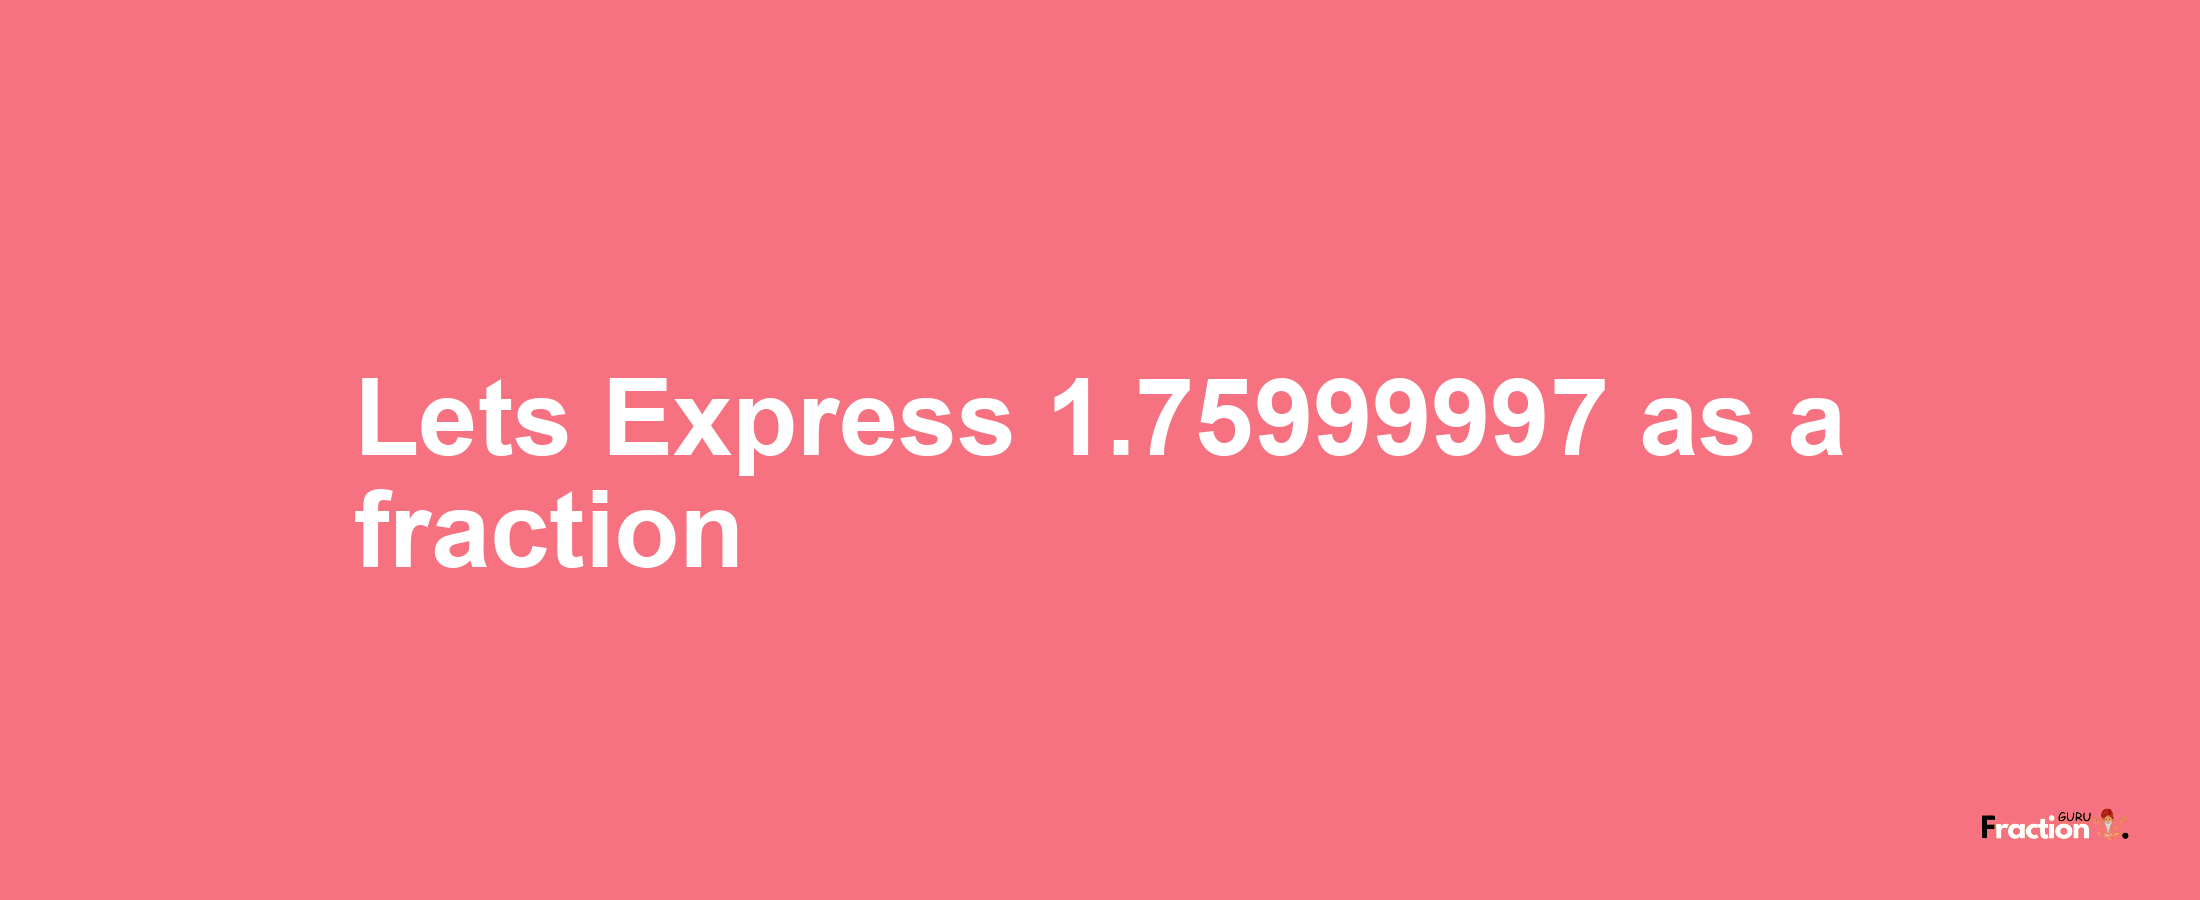 Lets Express 1.75999997 as afraction